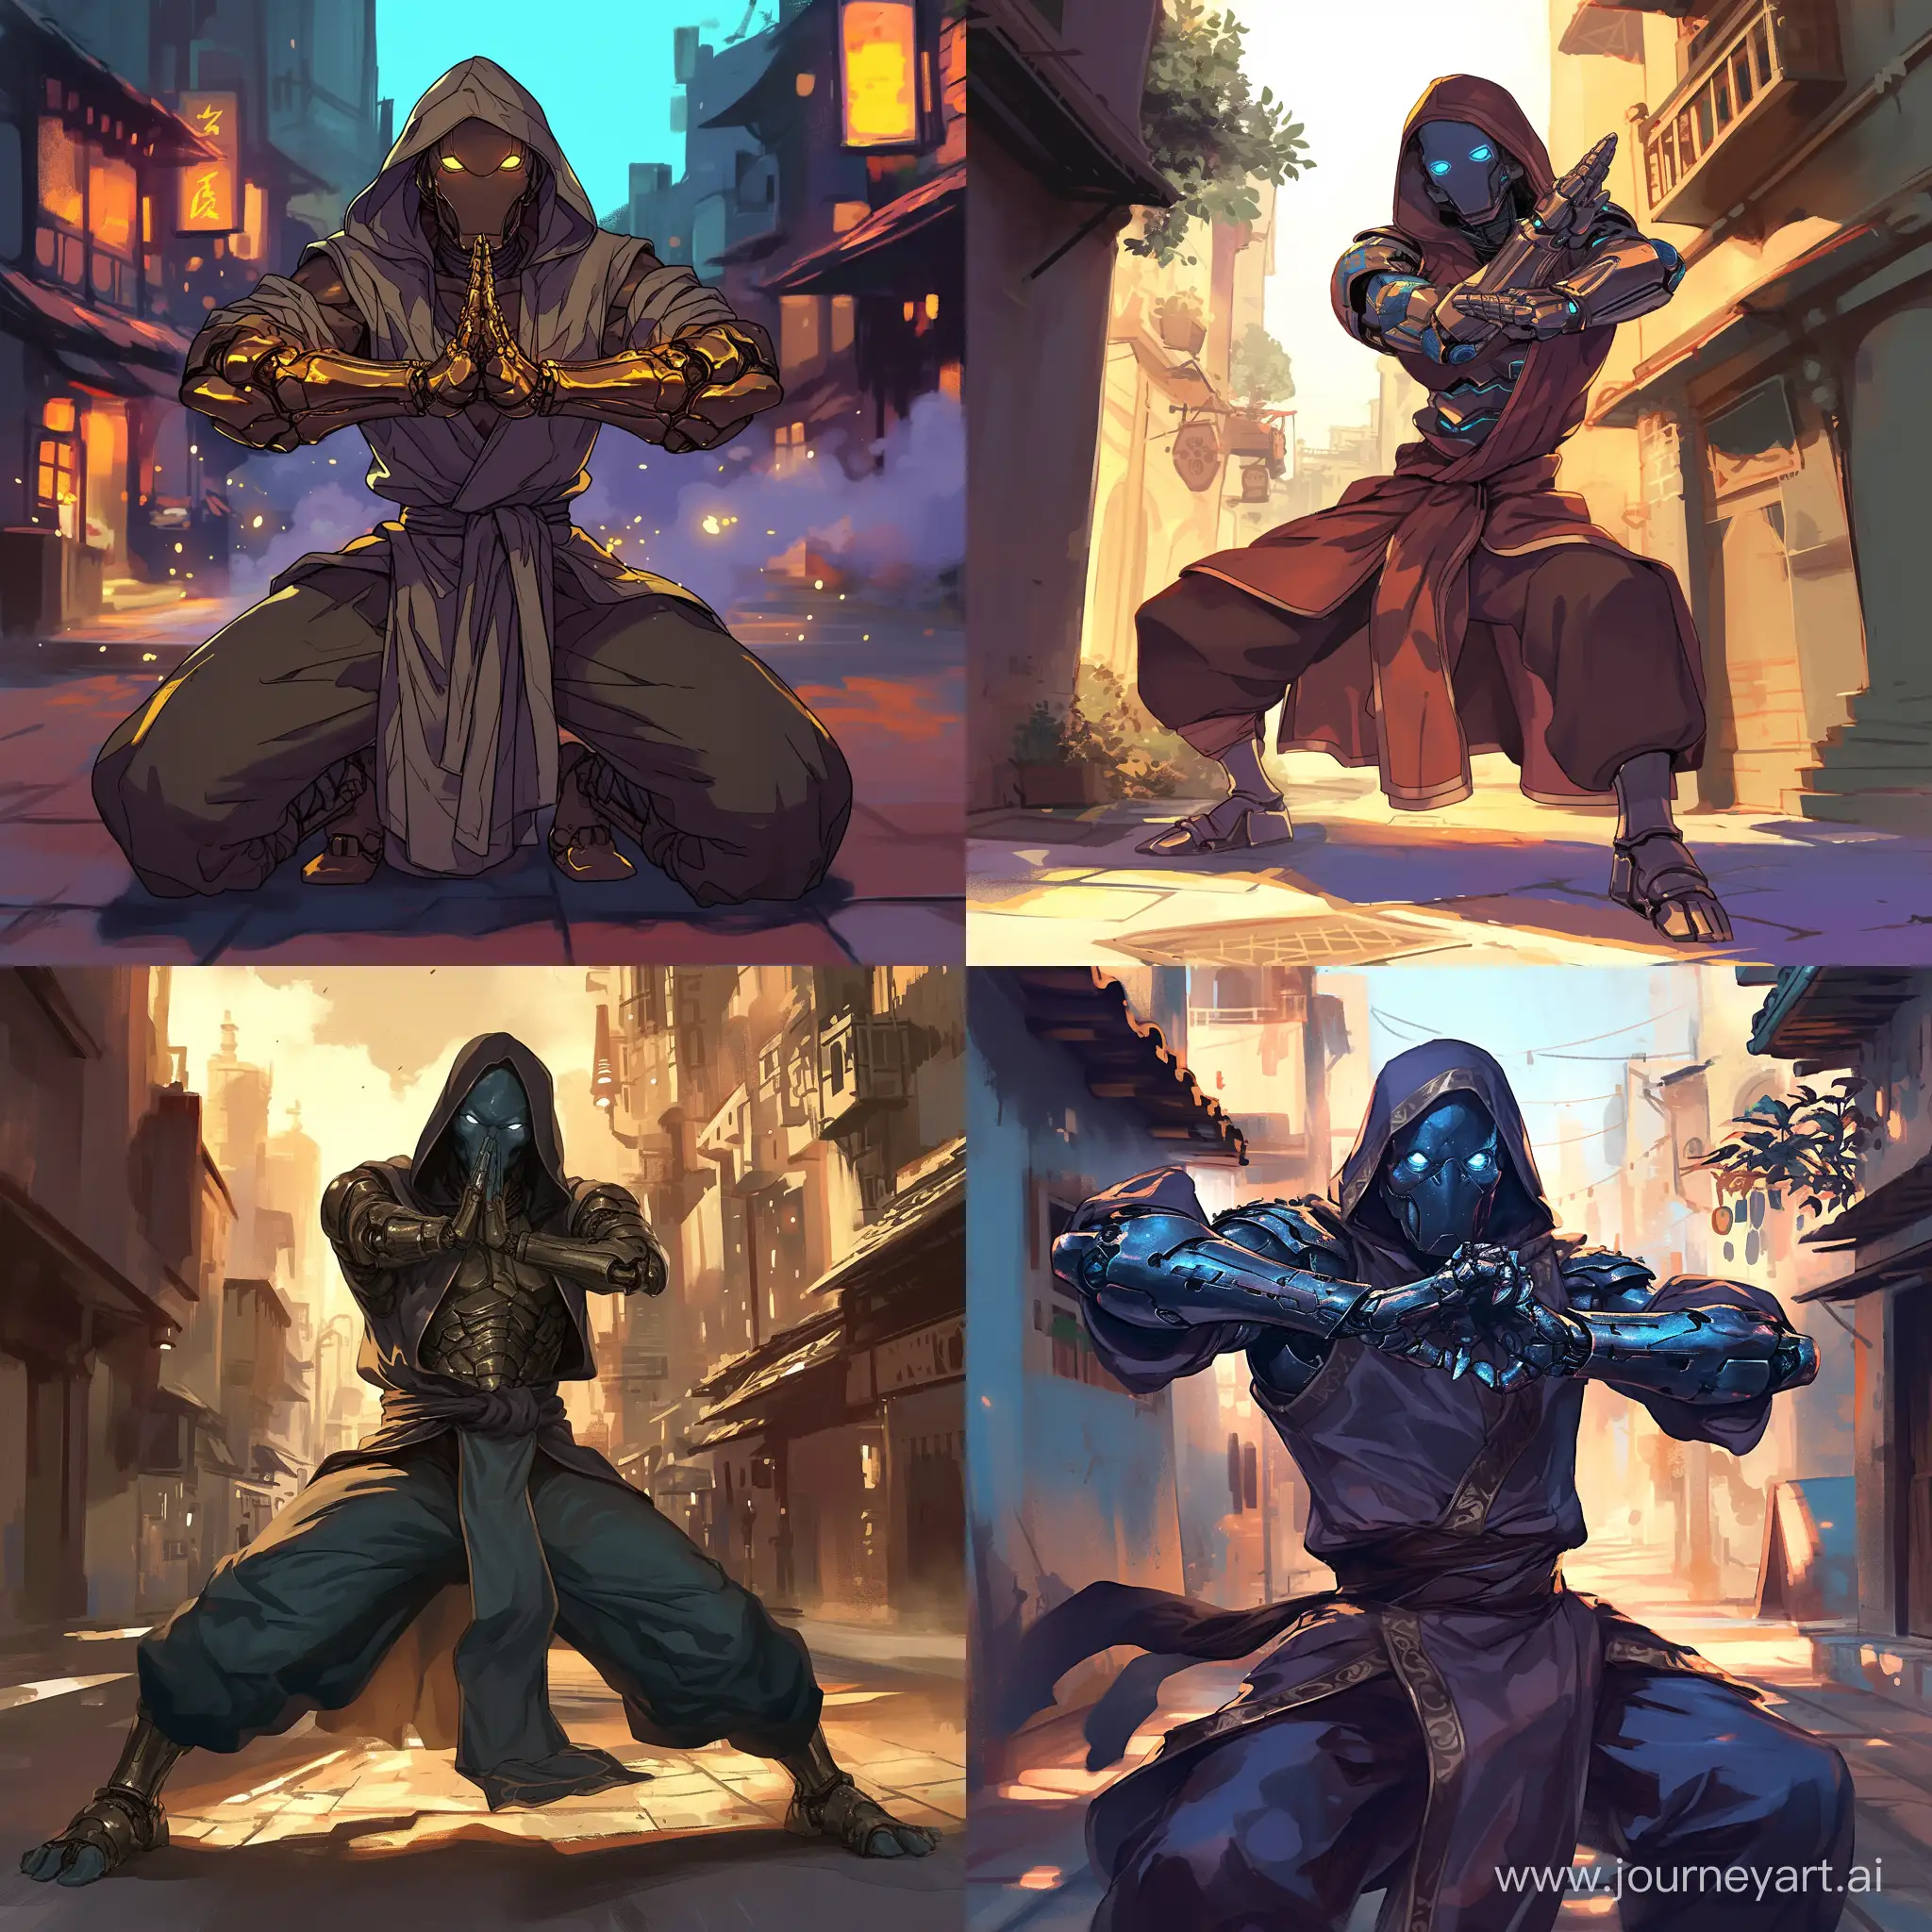 Warforged-Monk-in-City-Street-Martial-Arts-Stance